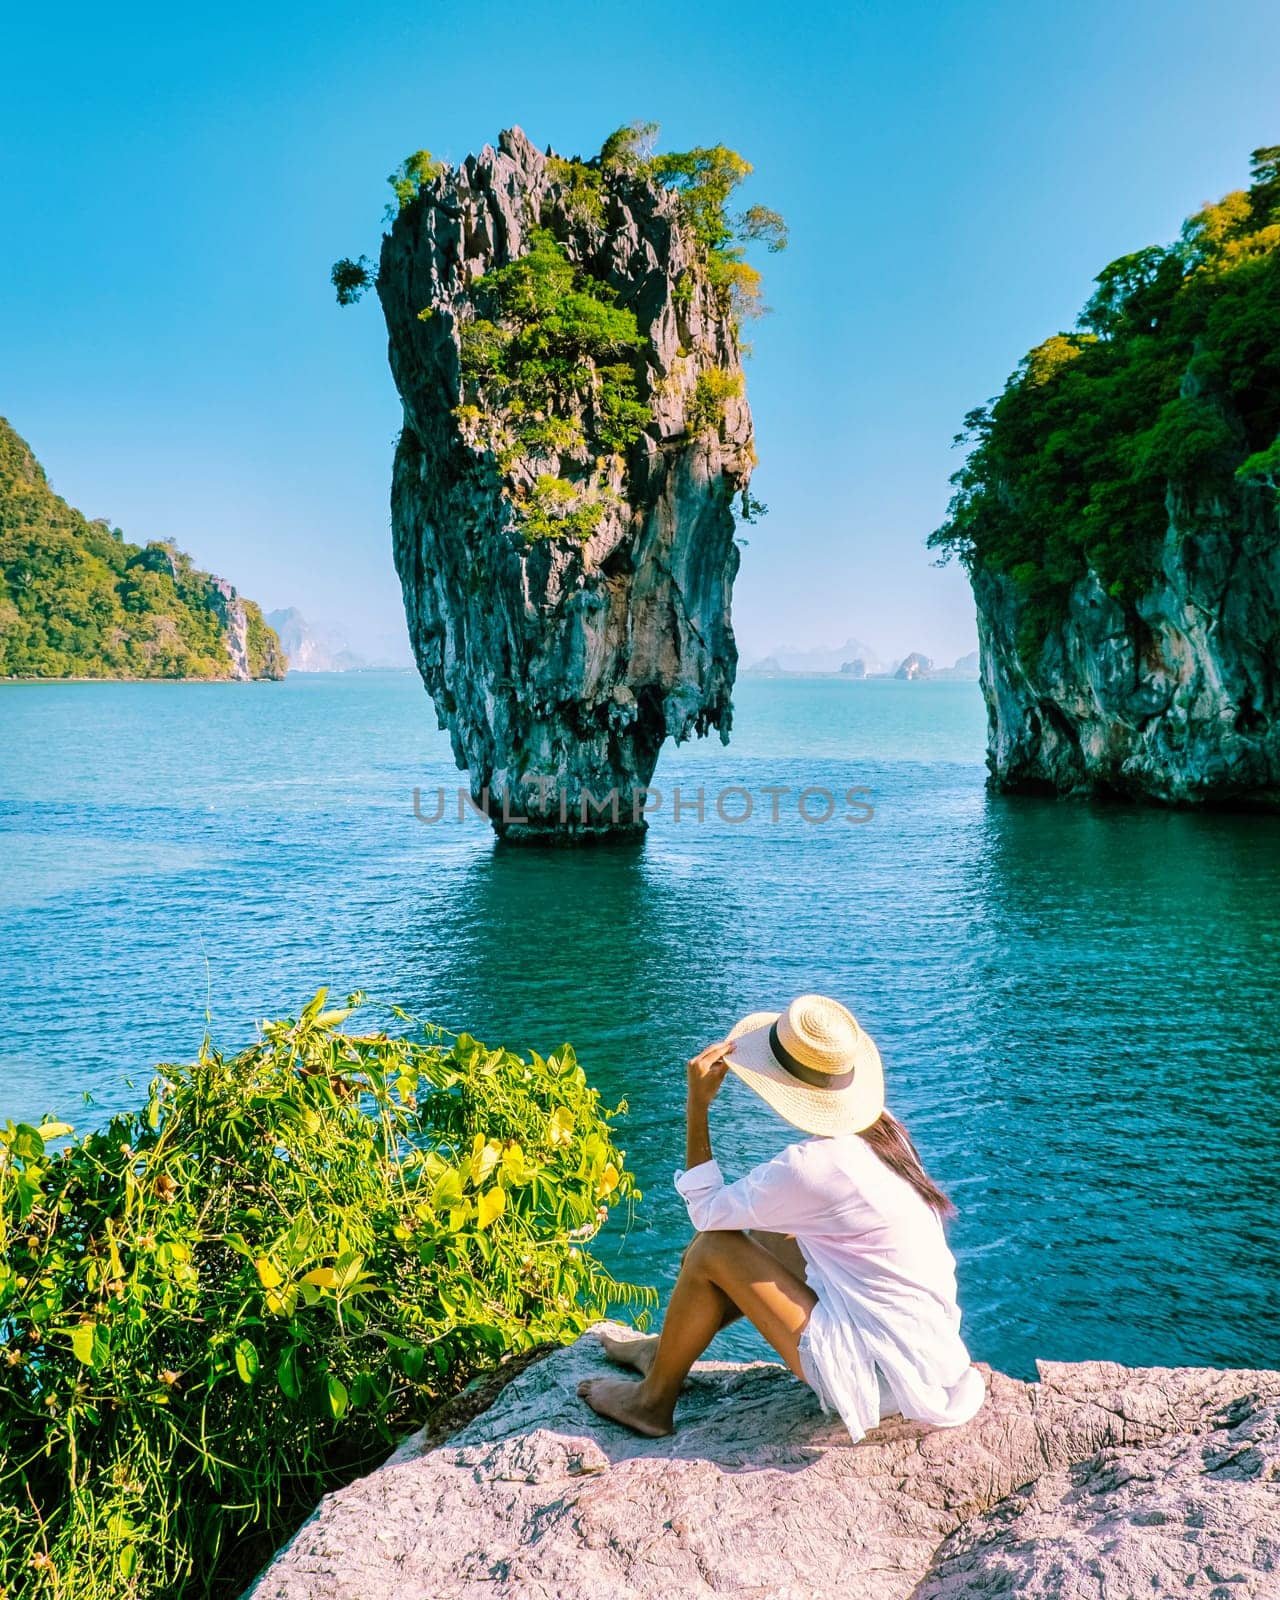 woman on vacation in Thailand visit Phangnga Bay Thailand James Bond Island, Asian woman with hat on a trip to James Bond Island in Phannga bay on a sunny day